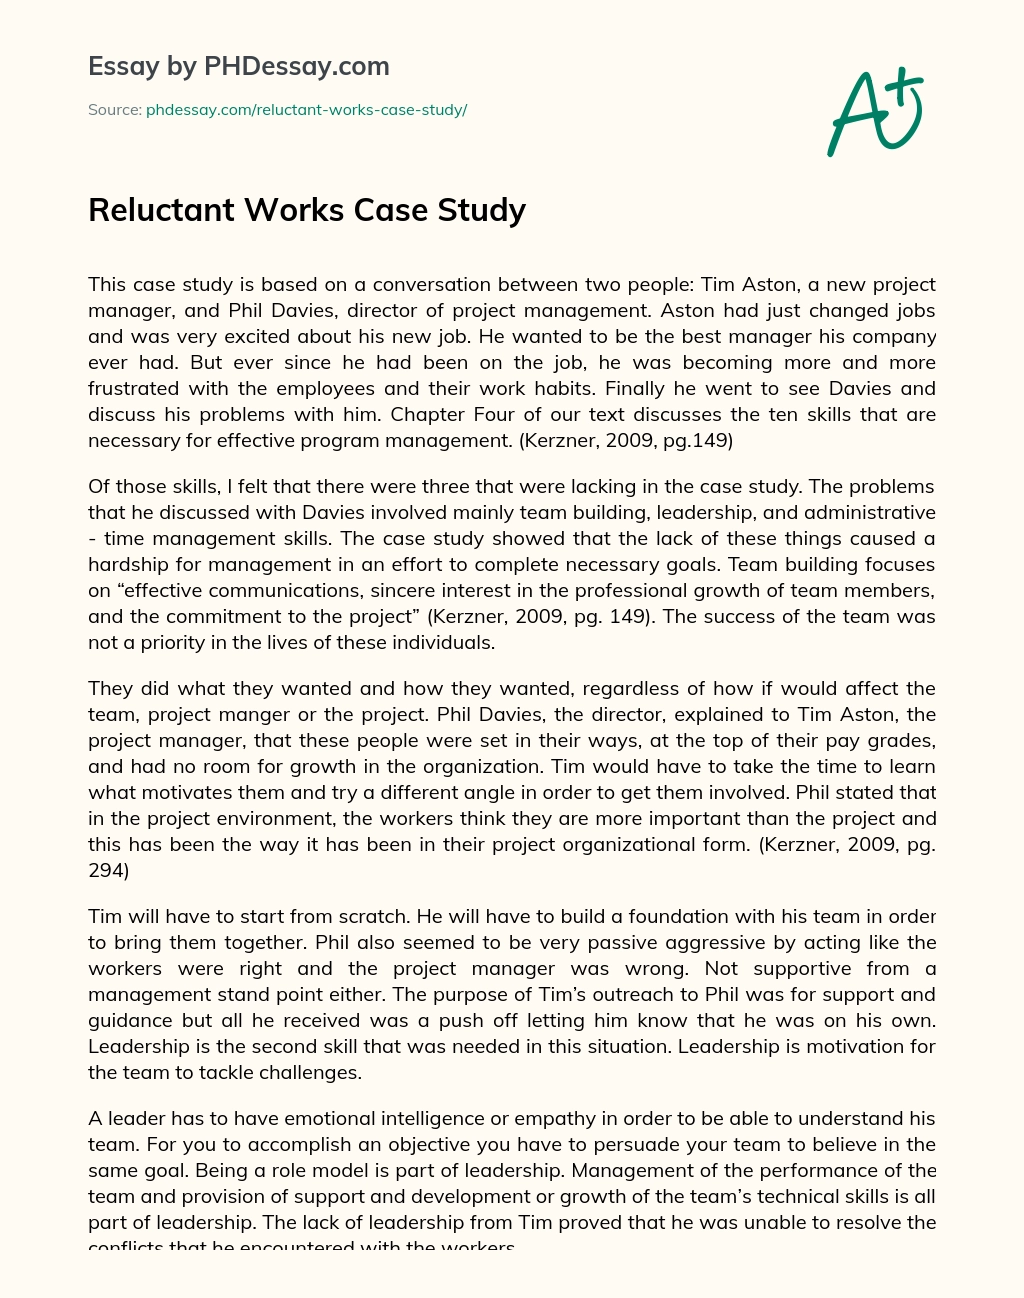 Reluctant Works Case Study essay